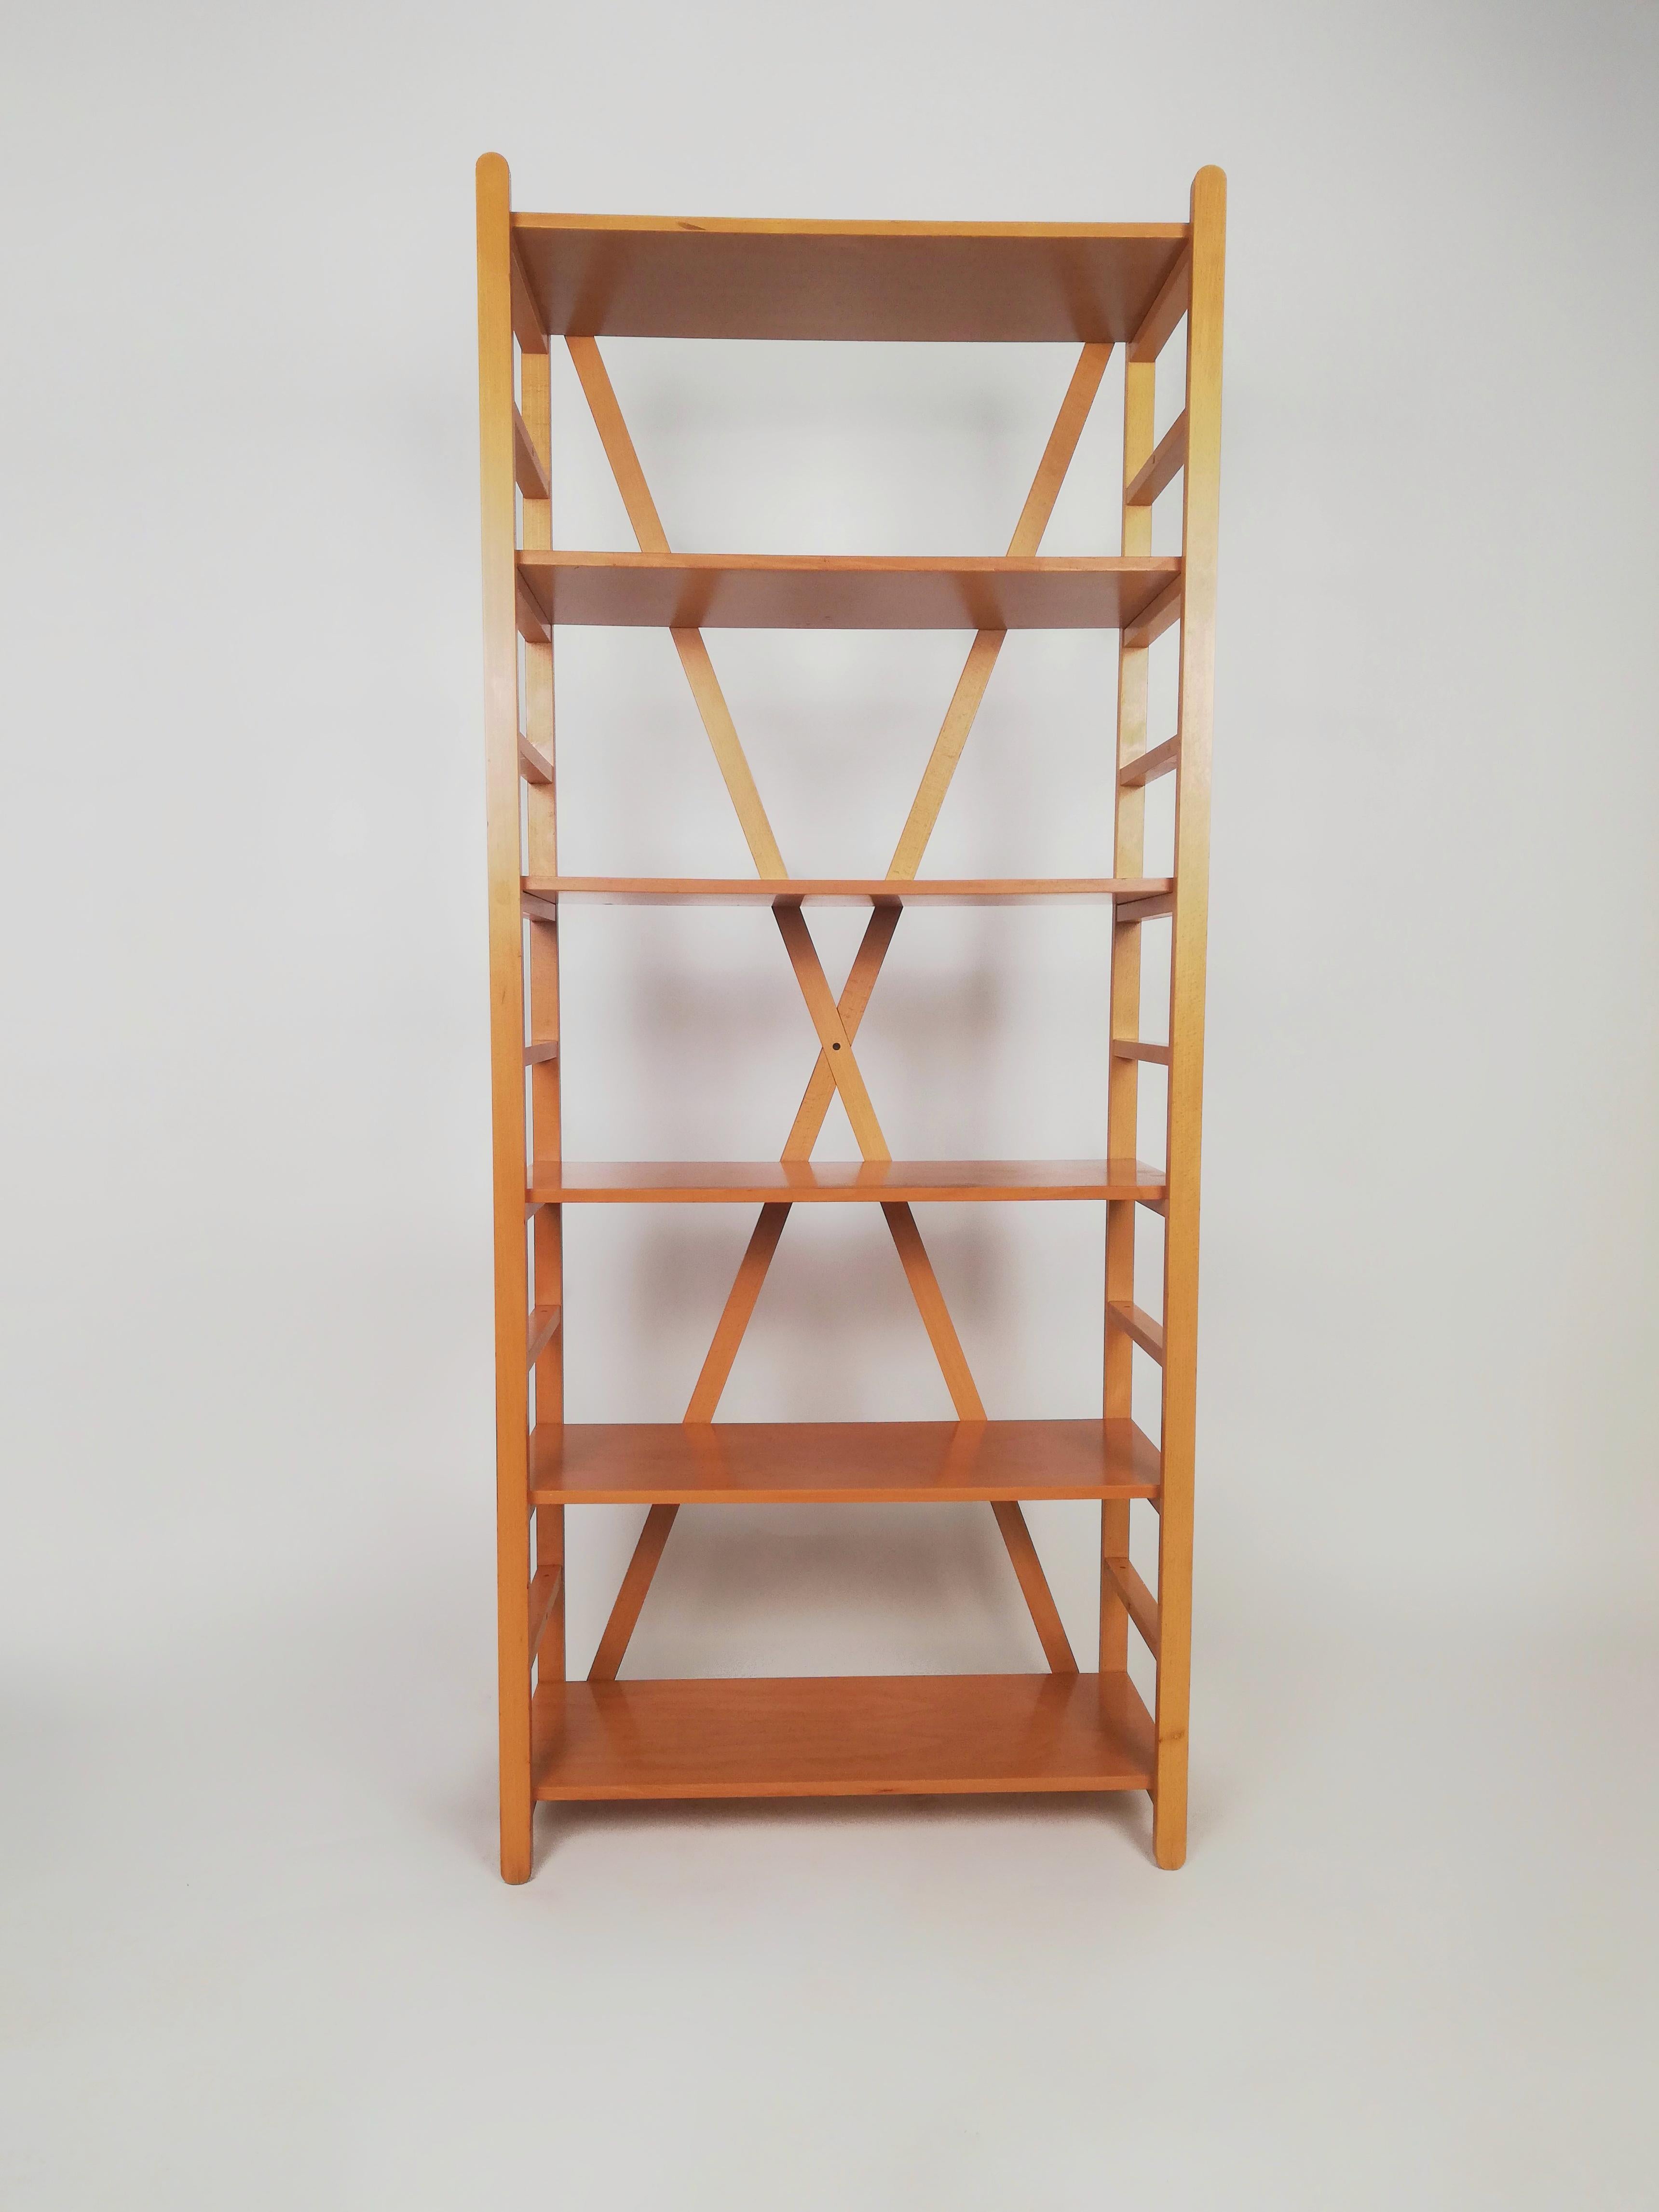 Scandinavian Modern Bookcase in the Style of Cassina, Made in Beech Wood Designed by Enrico Tonucci  For Sale